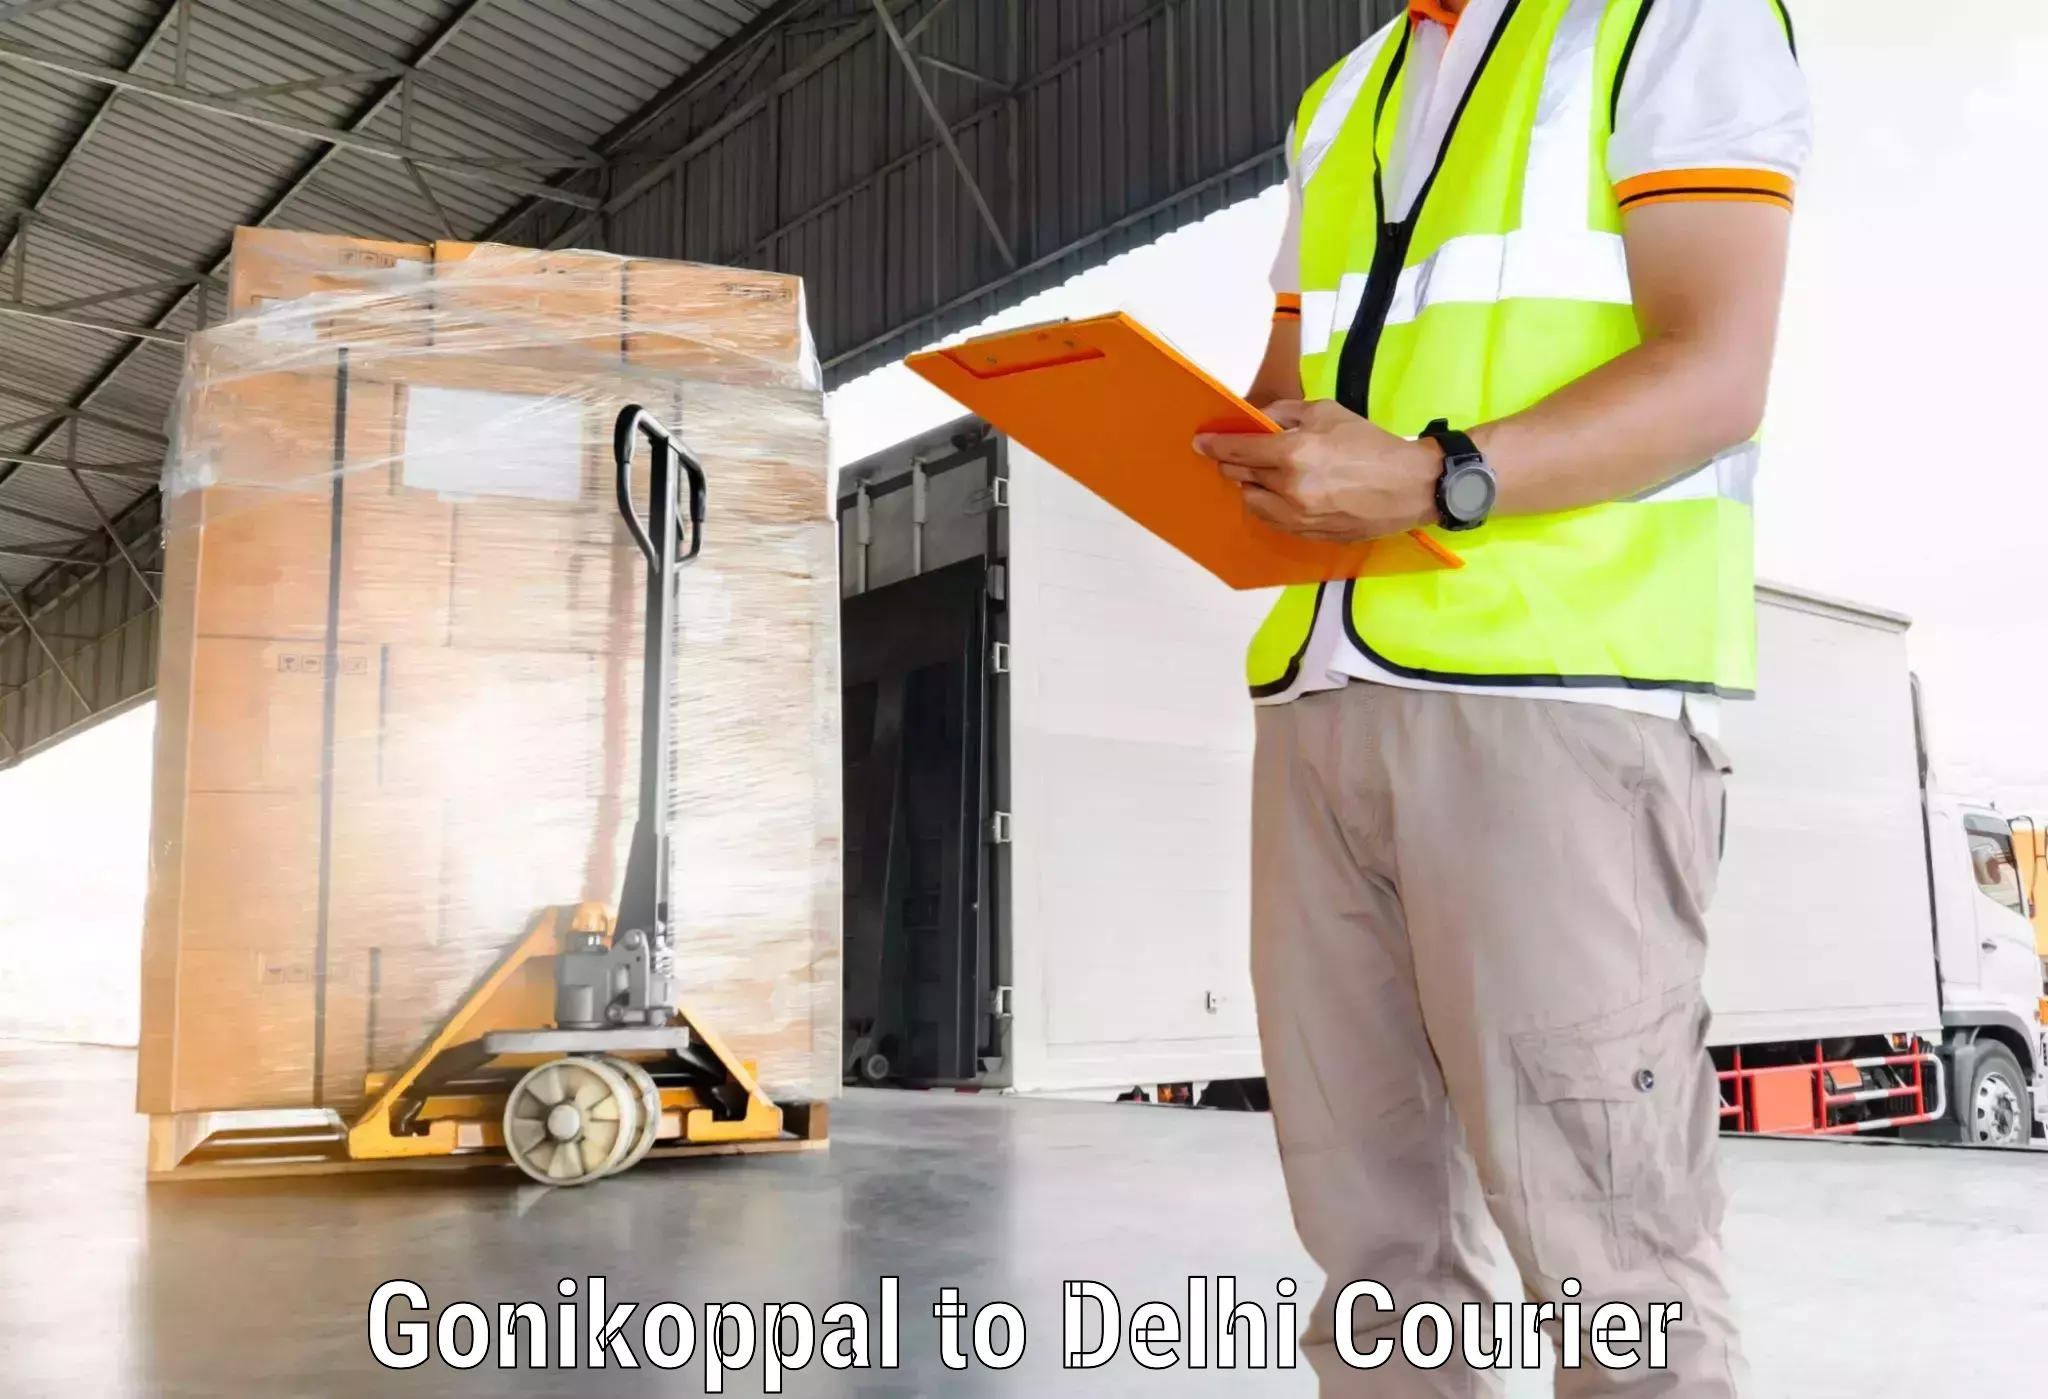 Express delivery network Gonikoppal to IIT Delhi